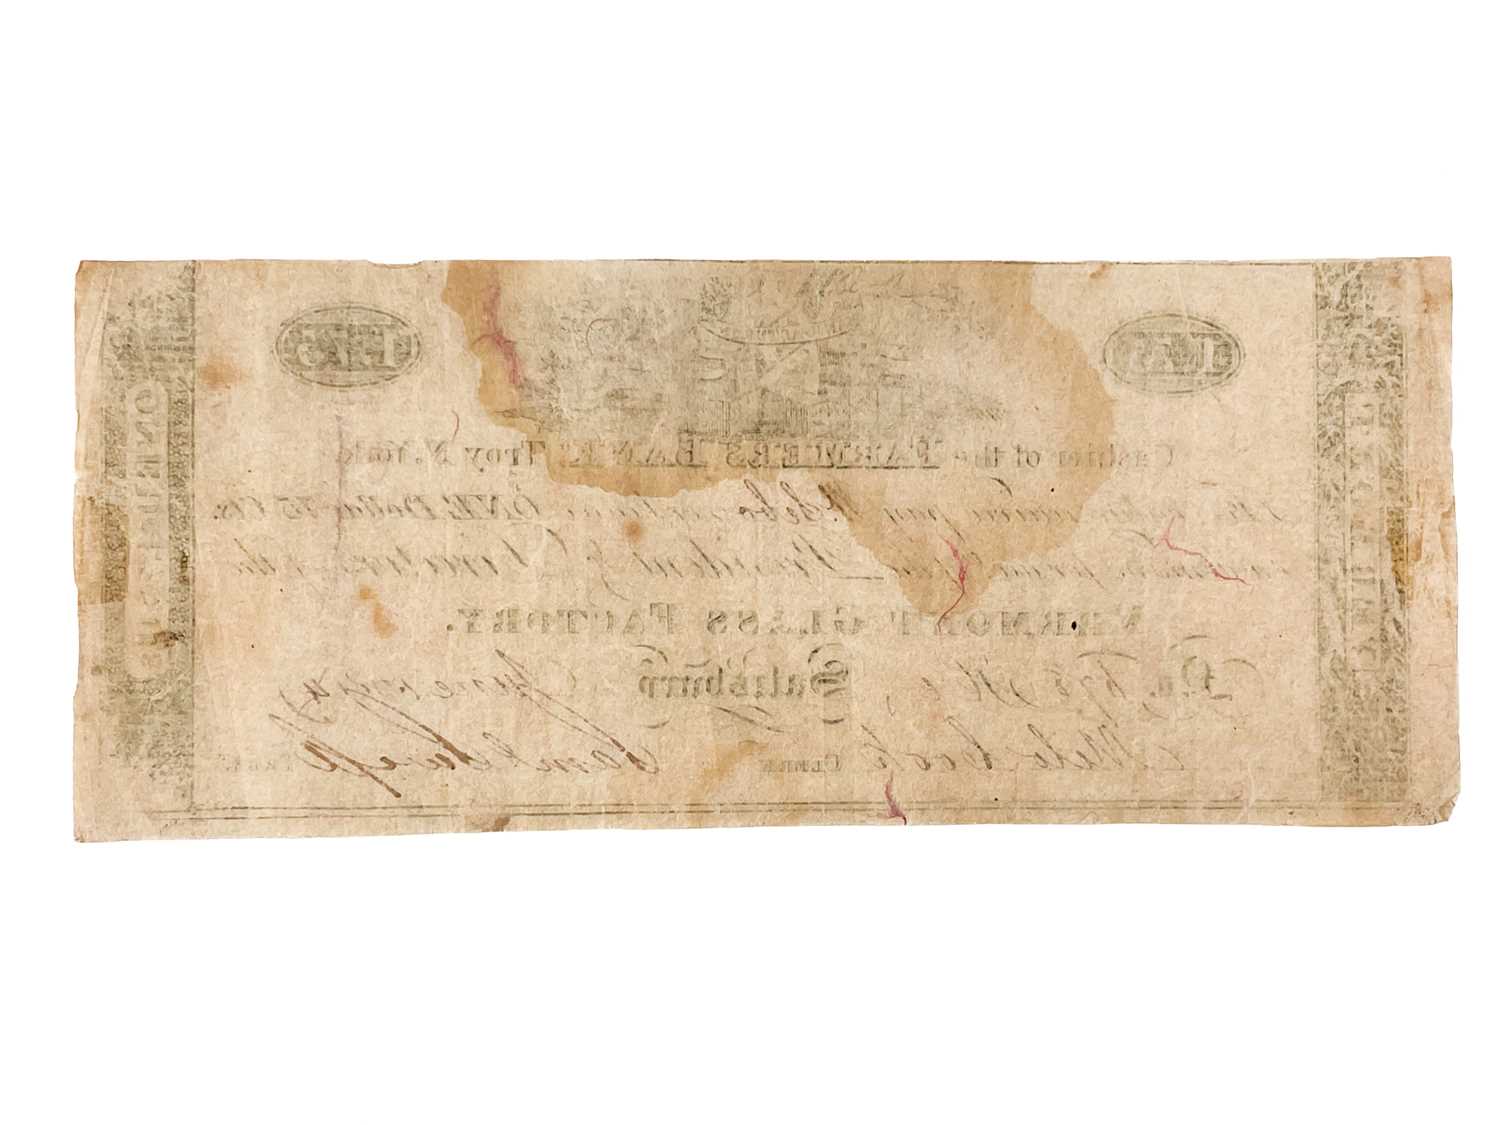 American interest, a 1.75 Dollar promissory note. - Image 3 of 3